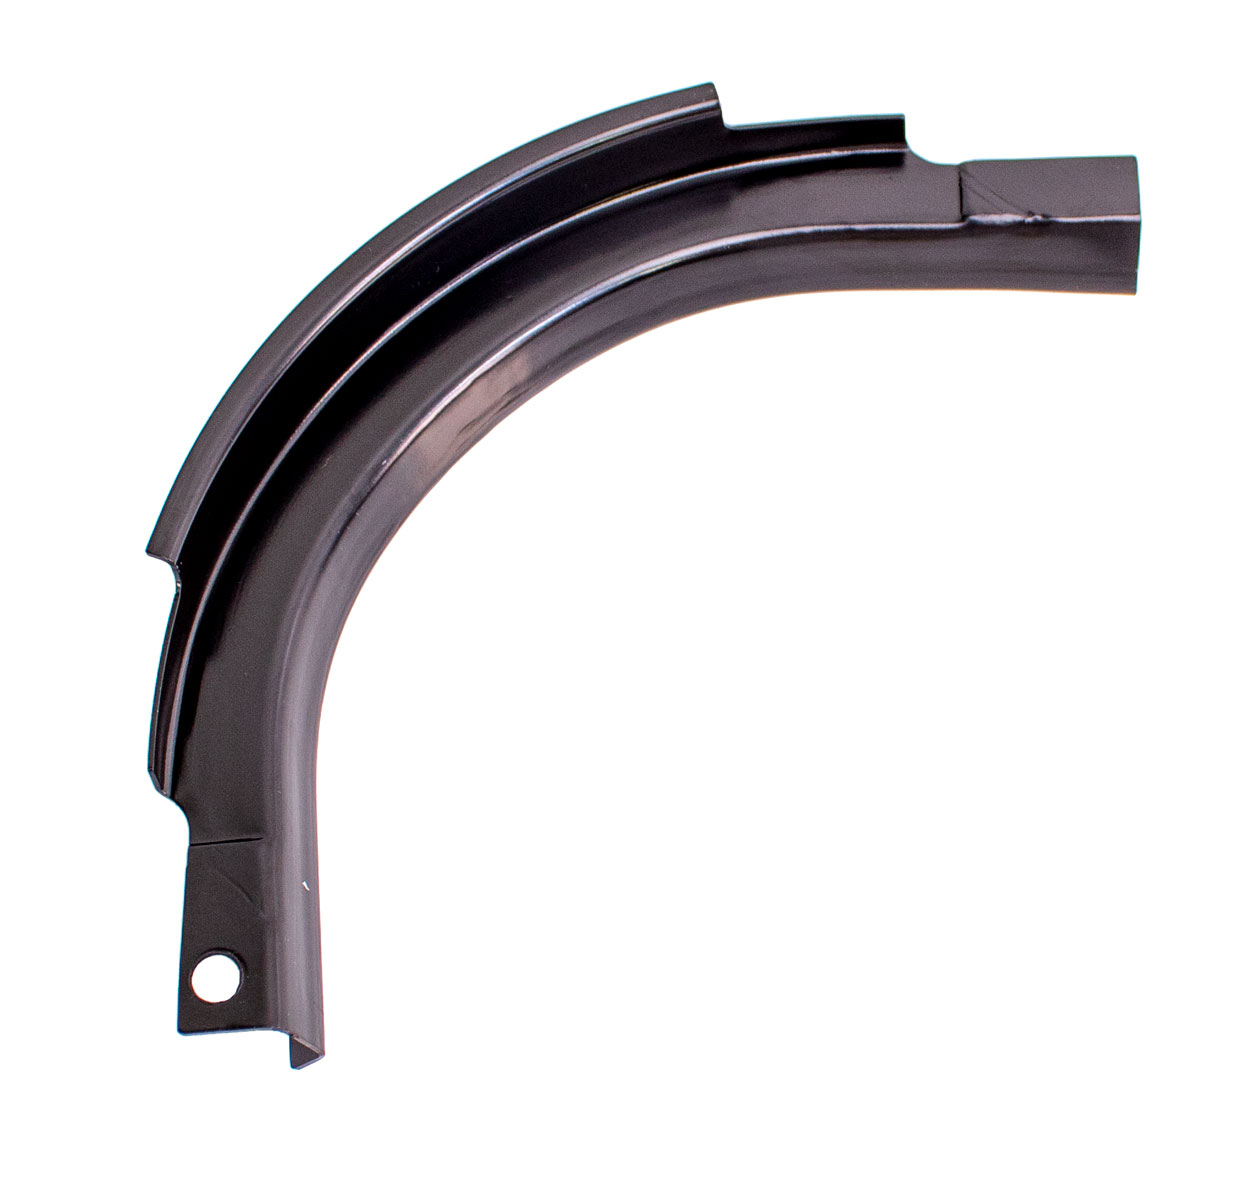 Upper Trunk Gutter - LH or RH - 66-70 Falcon; 66-71 Fairlane; 66-67 Comet Cyclone; 68-71 Torino (except Wagon or 68-71 Fastback)